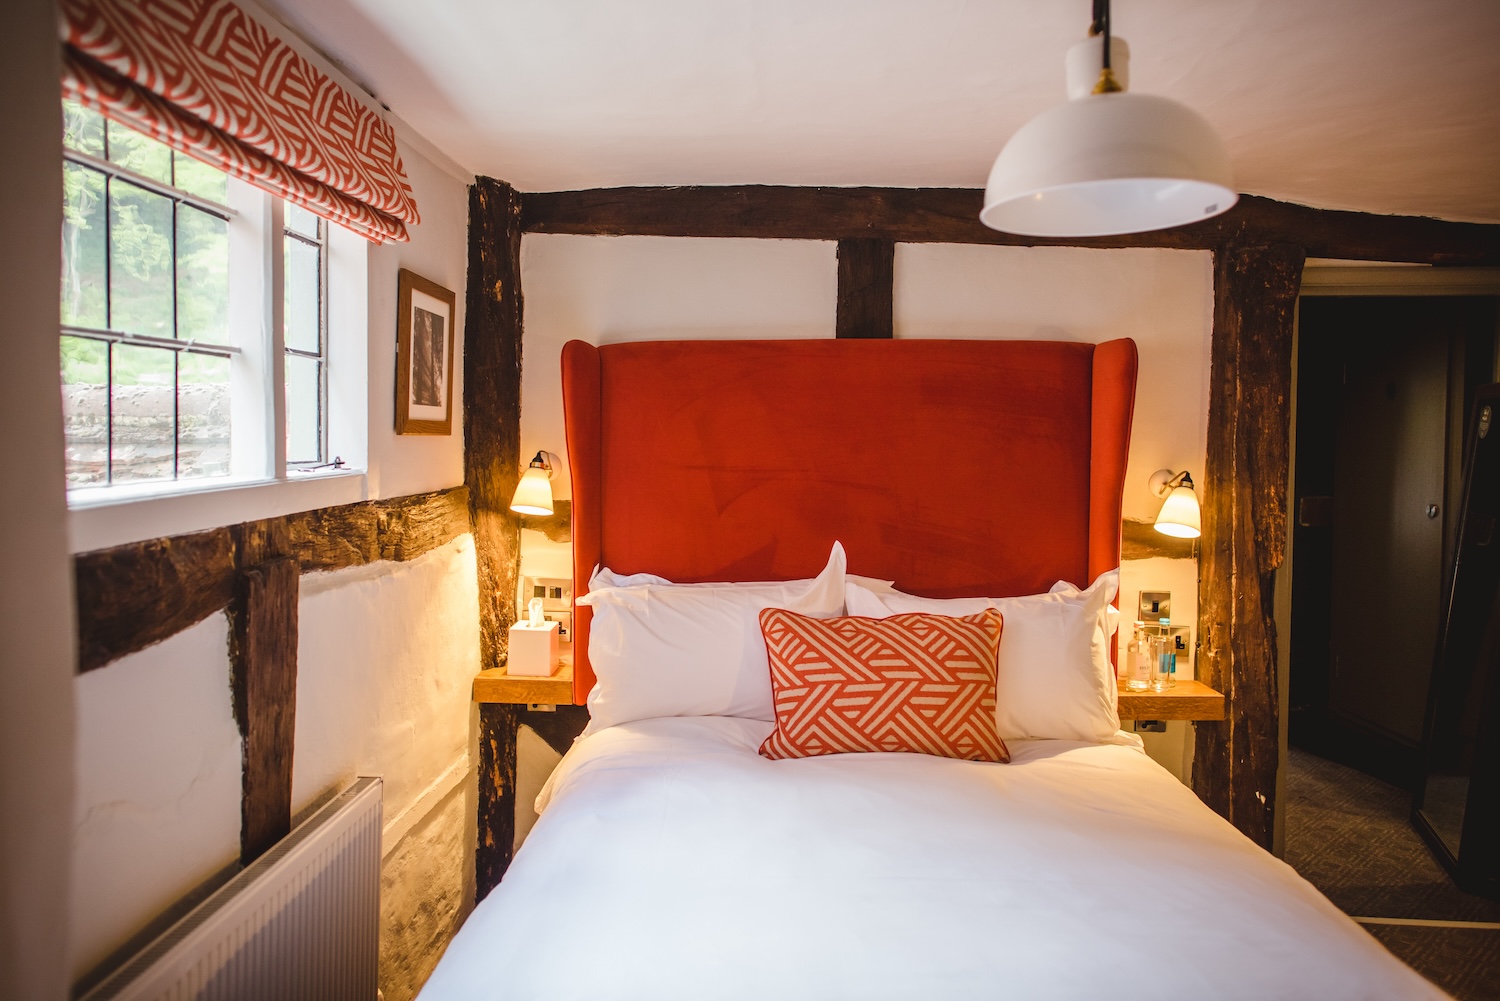 A bedroom at The Stag on the River near Godalming in Surrey.